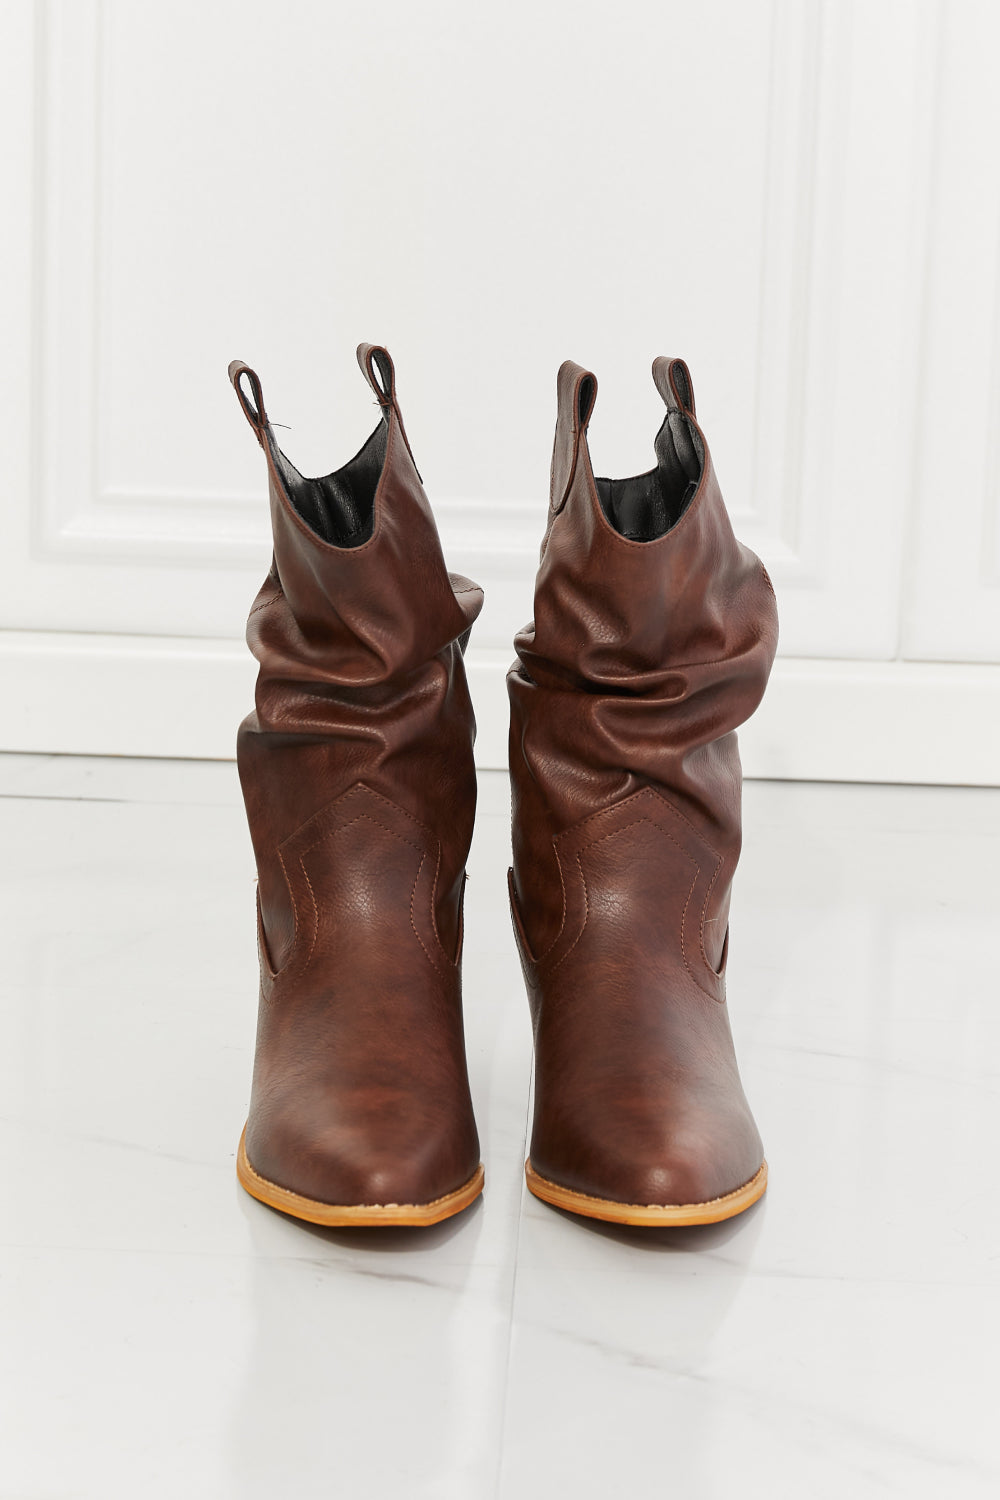 MMShoes Better in Texas Scrunch Cowboy Boots in Brown - BEAUTY COSMOTICS SHOP